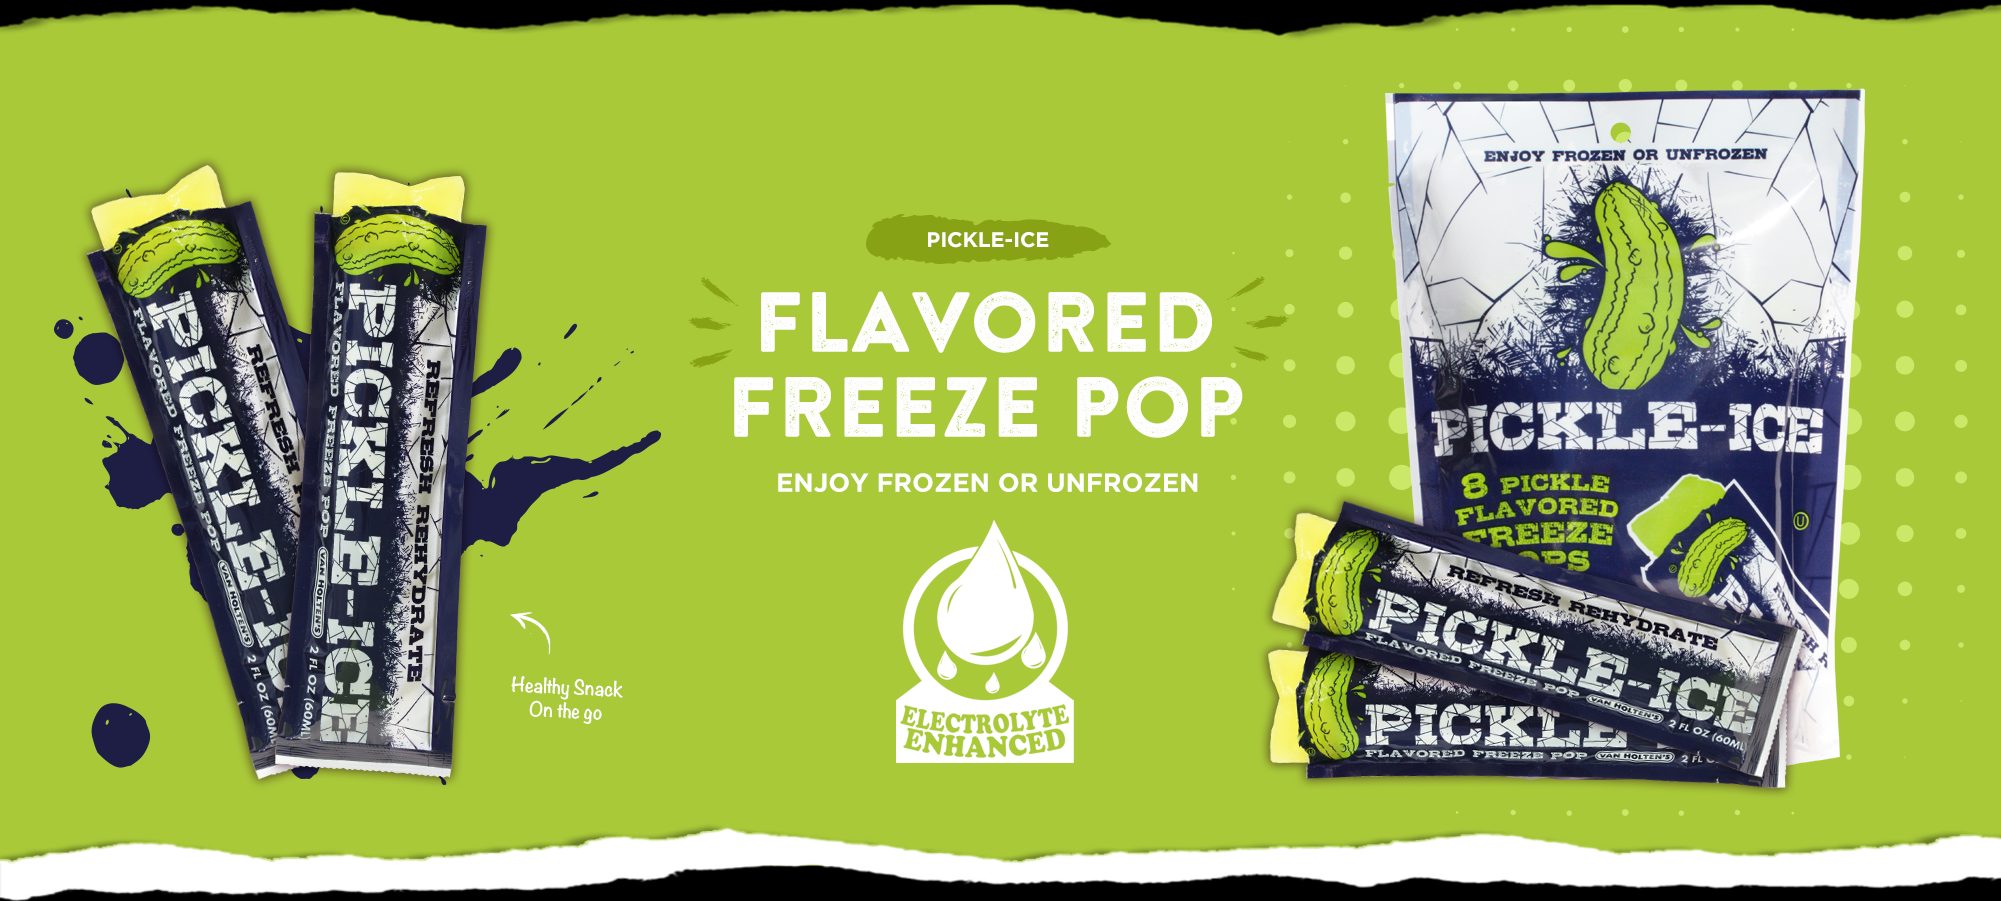 Pickle Ice Flavored Freeze Pop